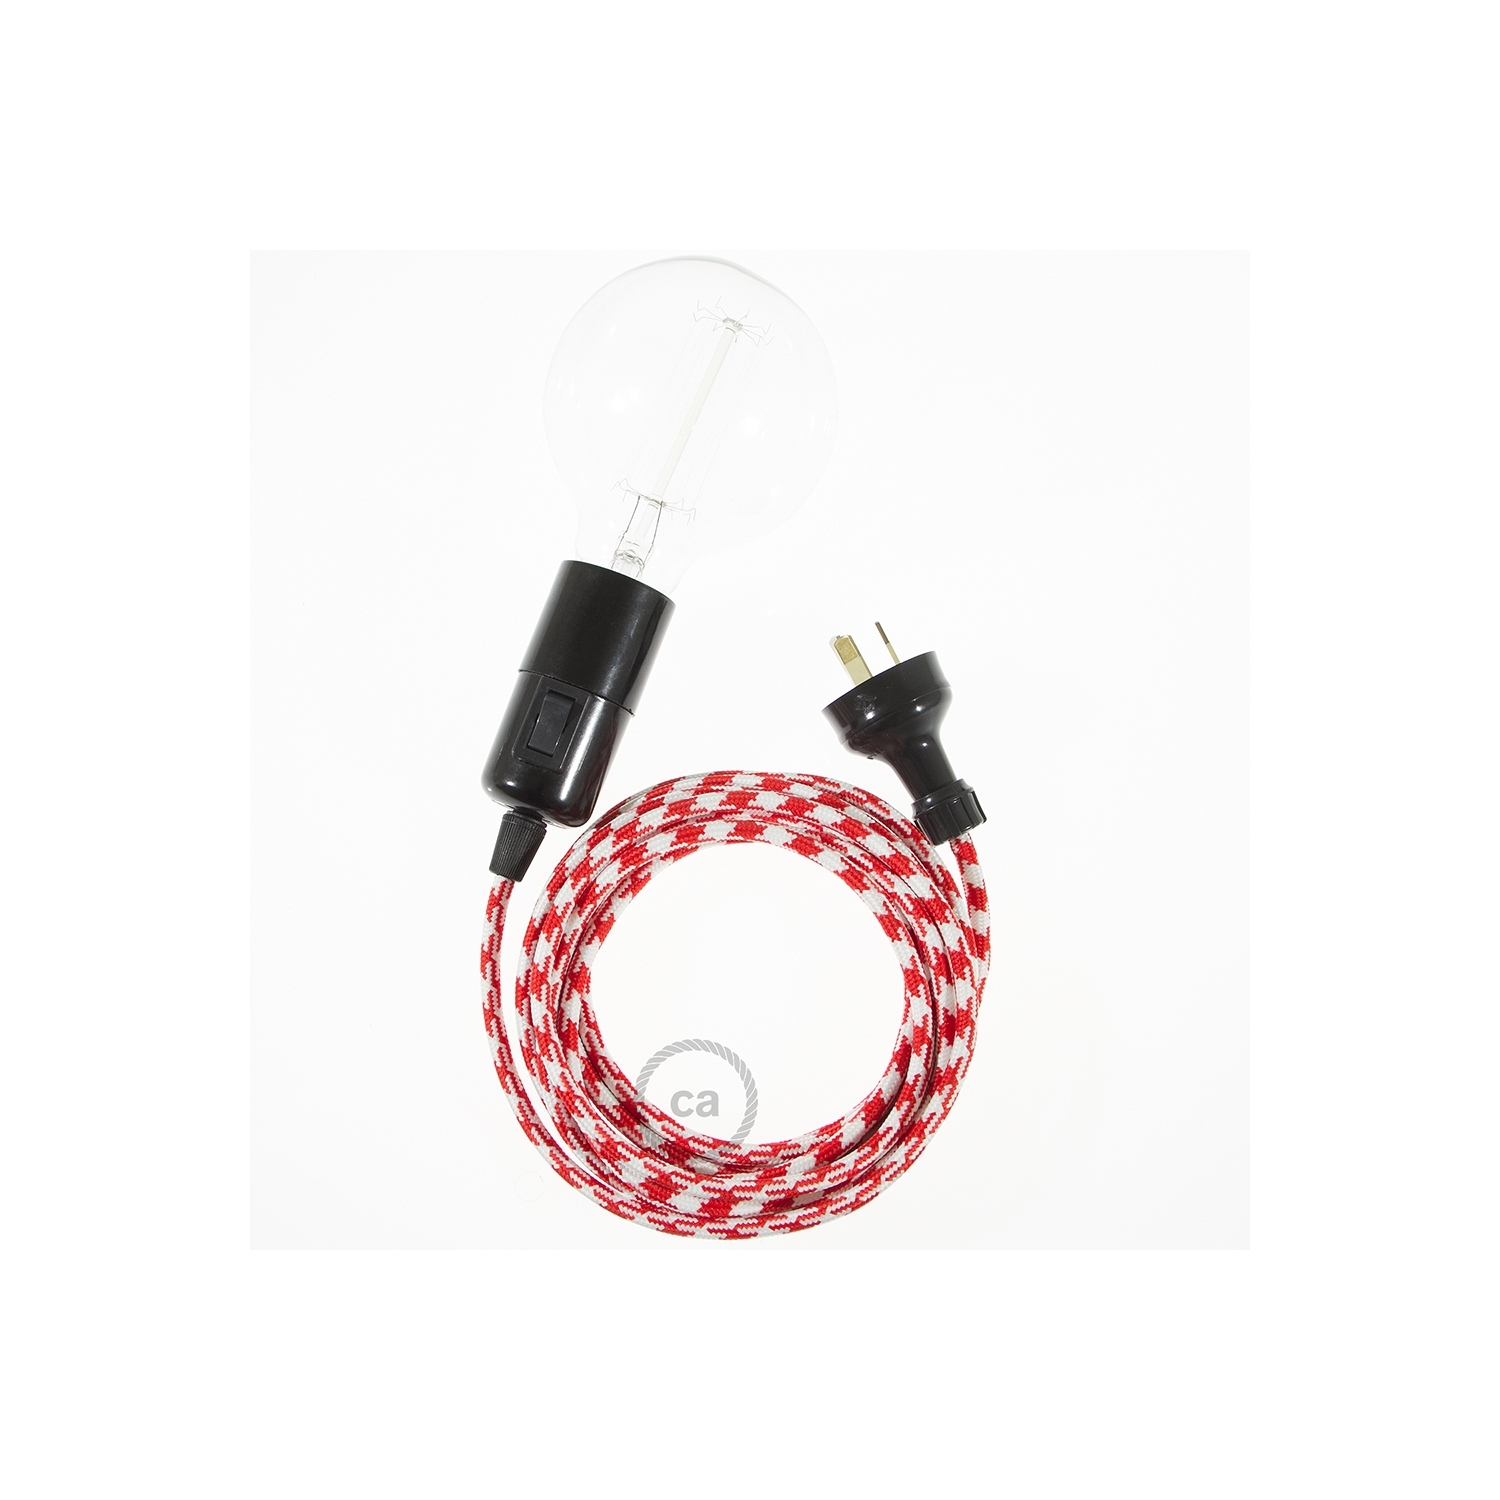 Create your RP09 Bicolored Red Snake and bring the light wherever you want.